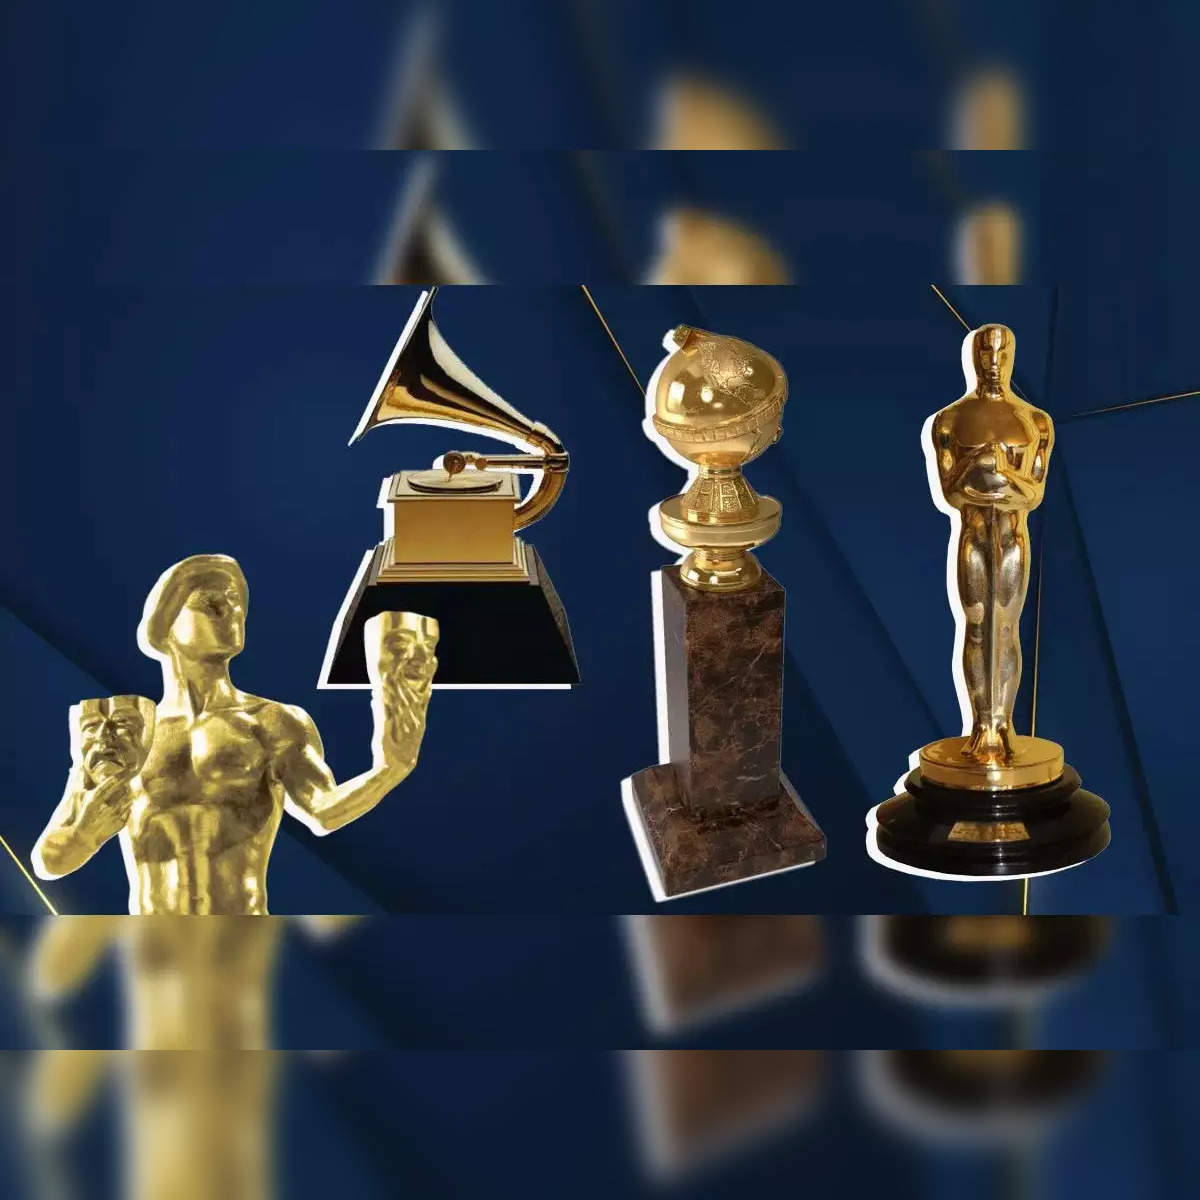 American Made: The Oscar Statuette - Global Electronic Services